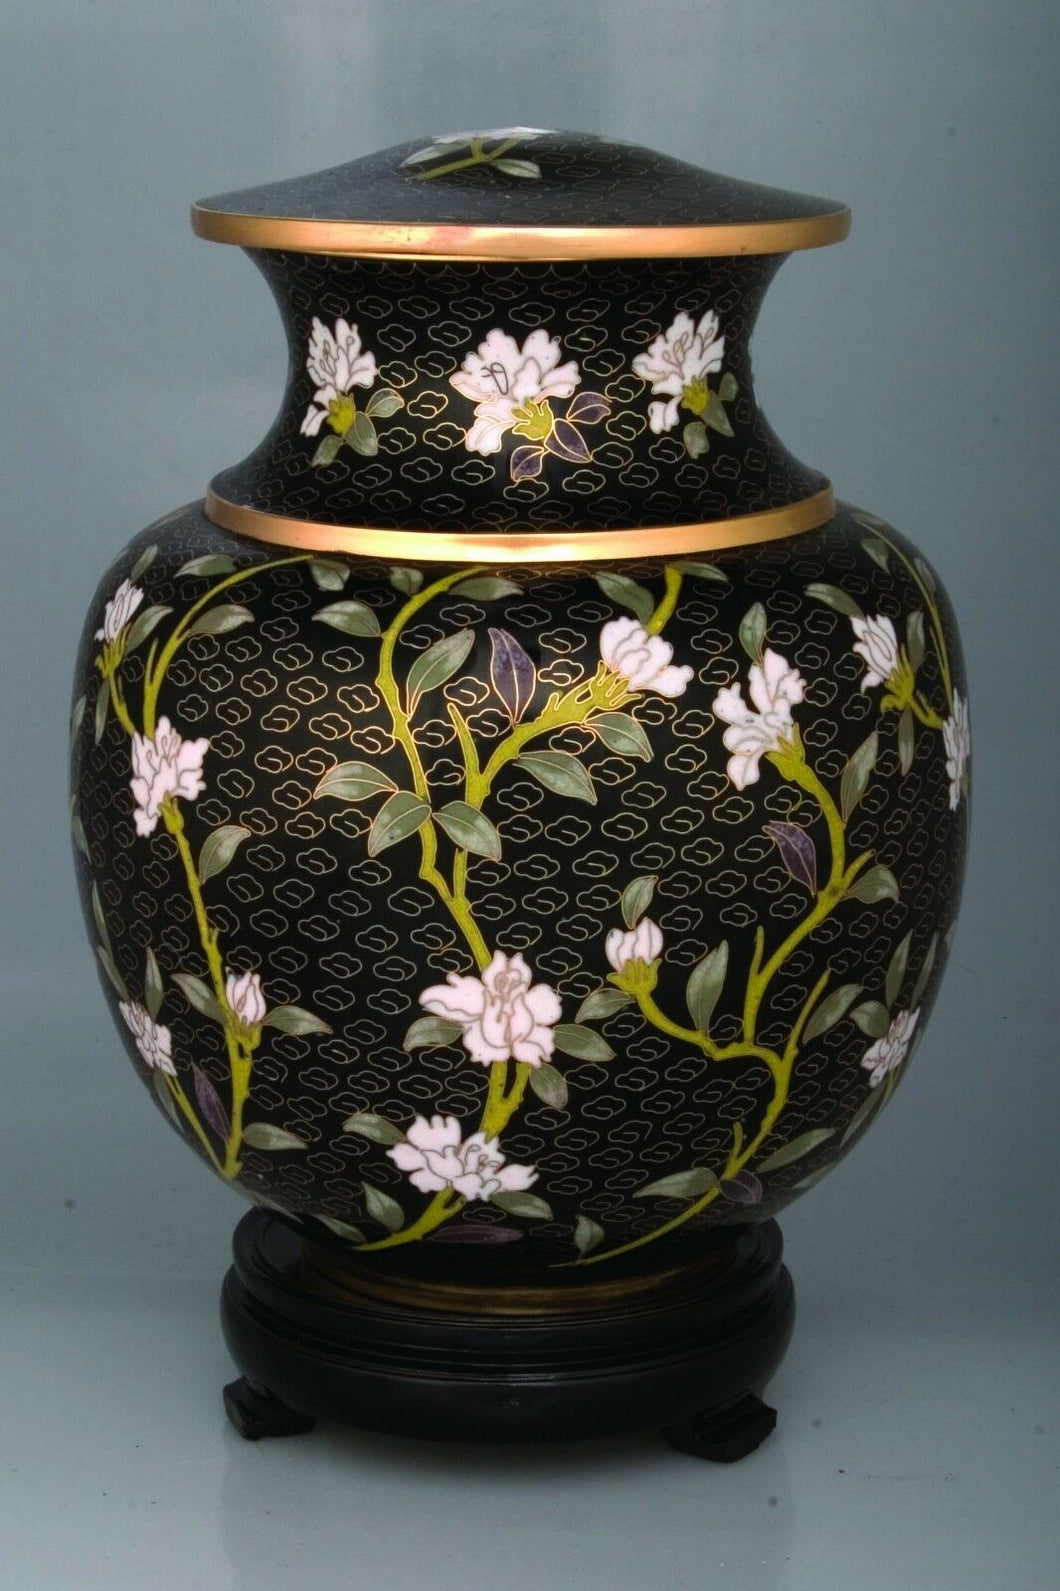 Large/Adult 215 cubic inches Minuet Cloisonne Cremation Urn for Ashes w/Flowers